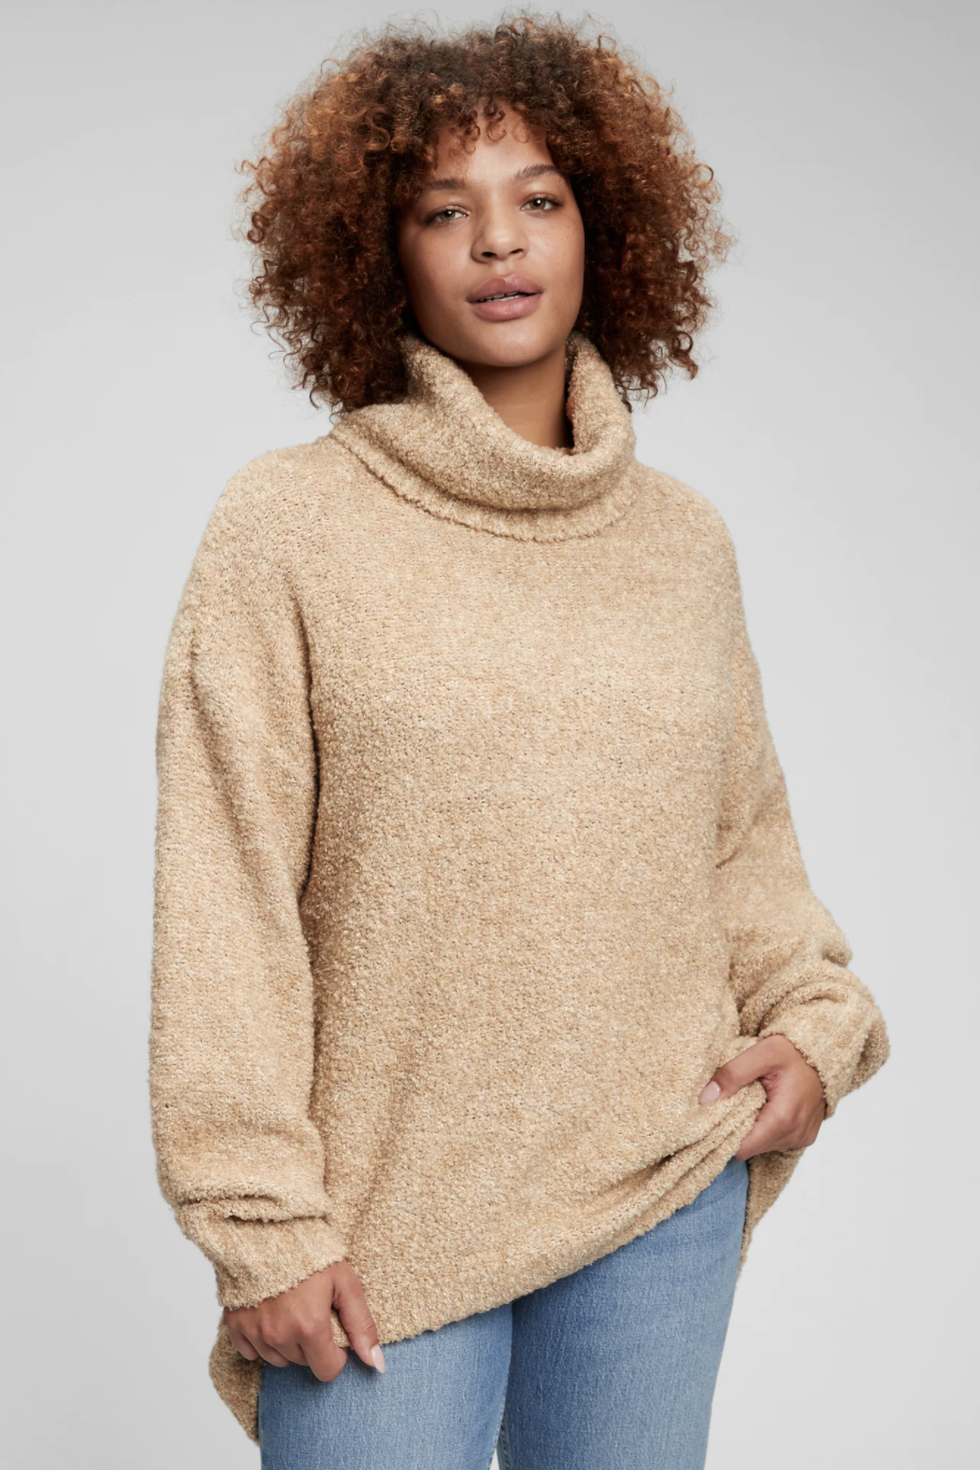 The Gap Cozy Boucle Cowl Neck Sweater